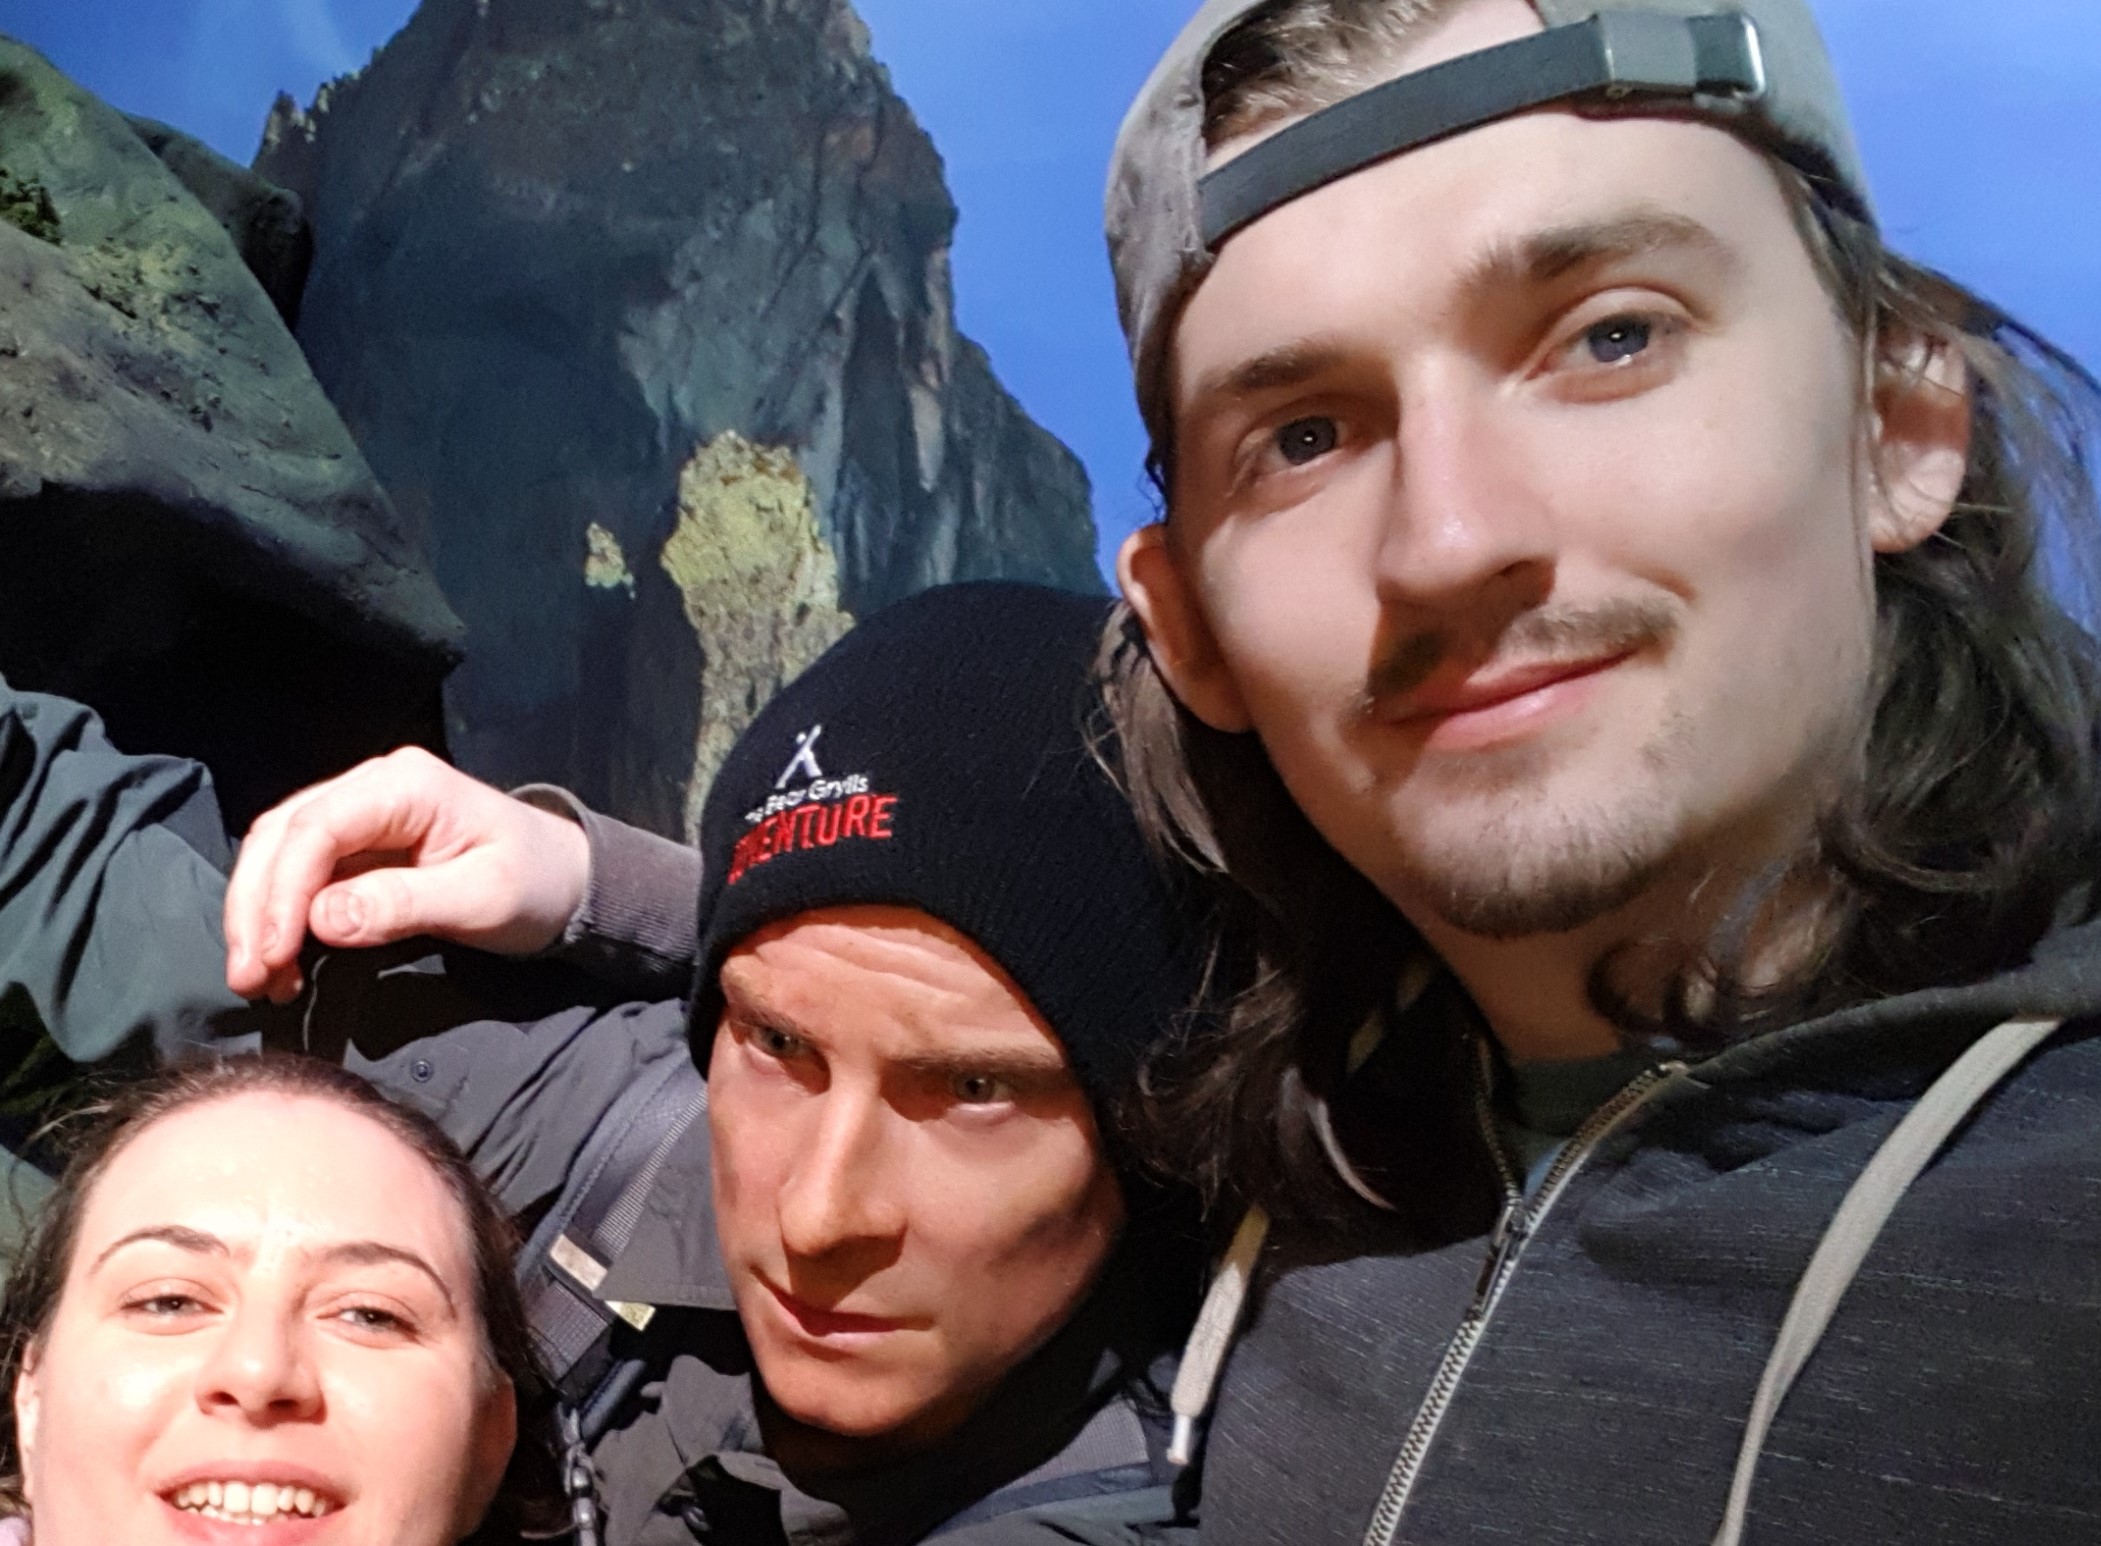 A male and female taking a selfie with a wax statue of Bear Grylls hanging off a rock